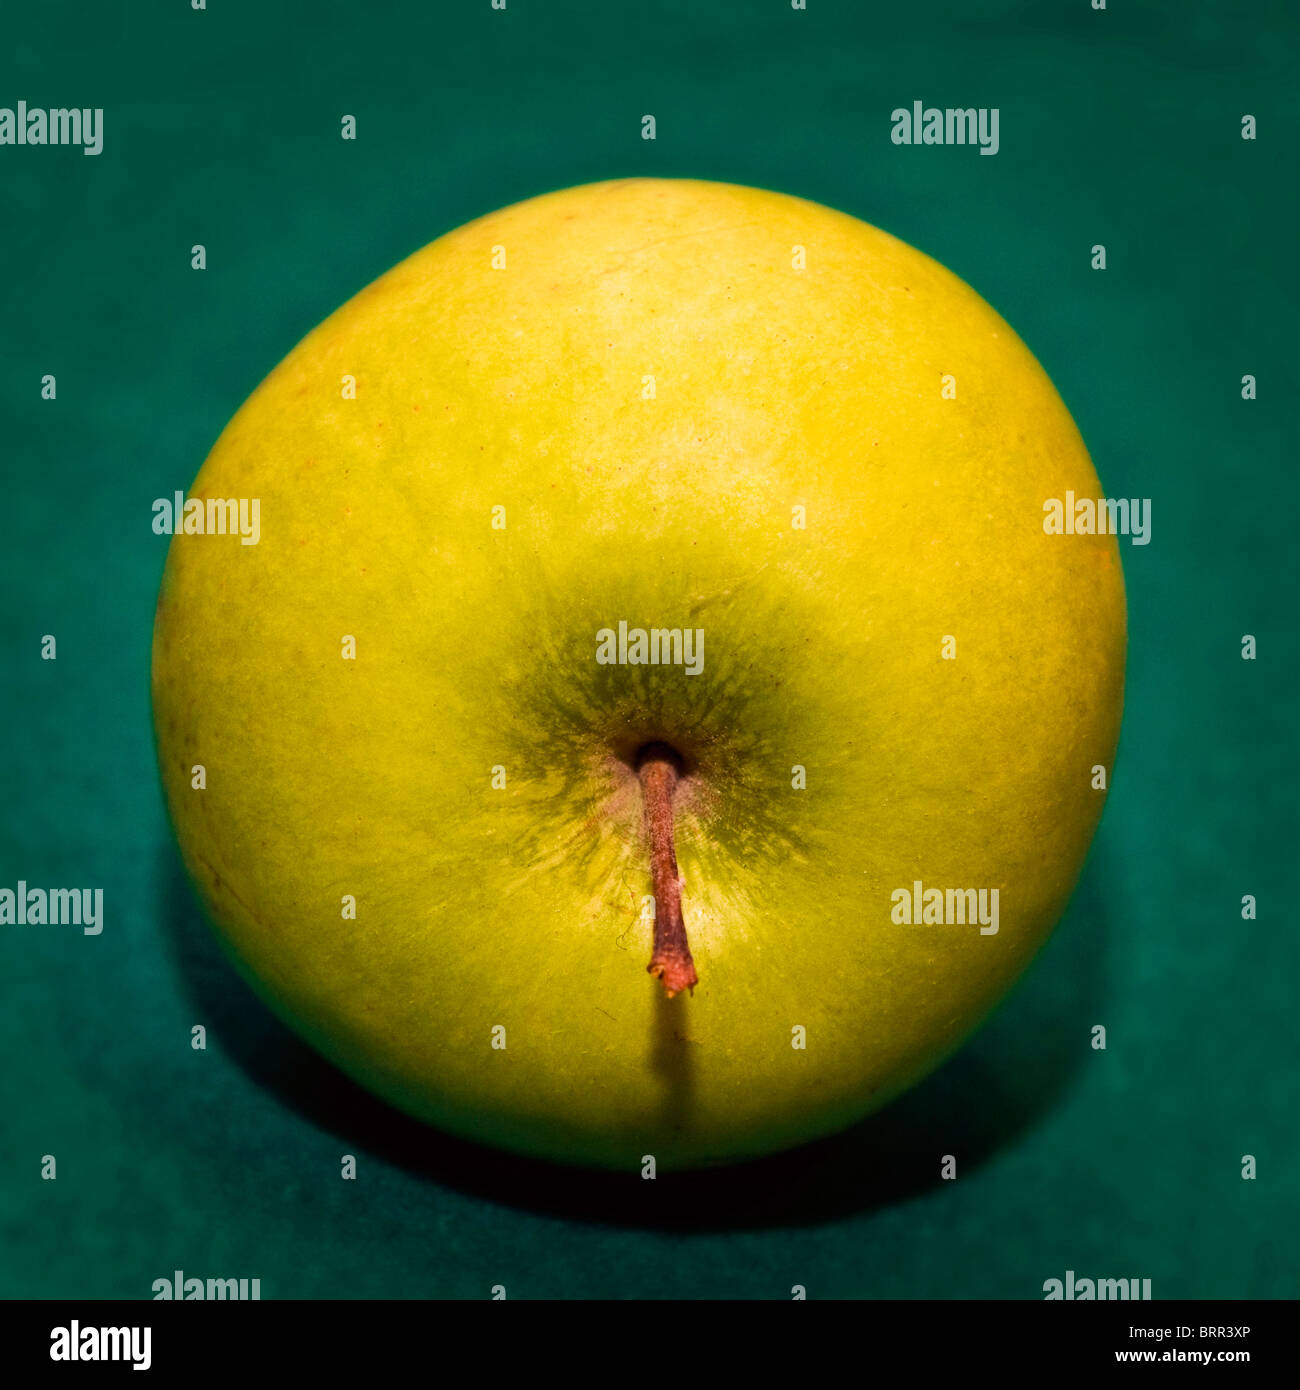 Studio shot of an apple showing the stalk Stock Photo